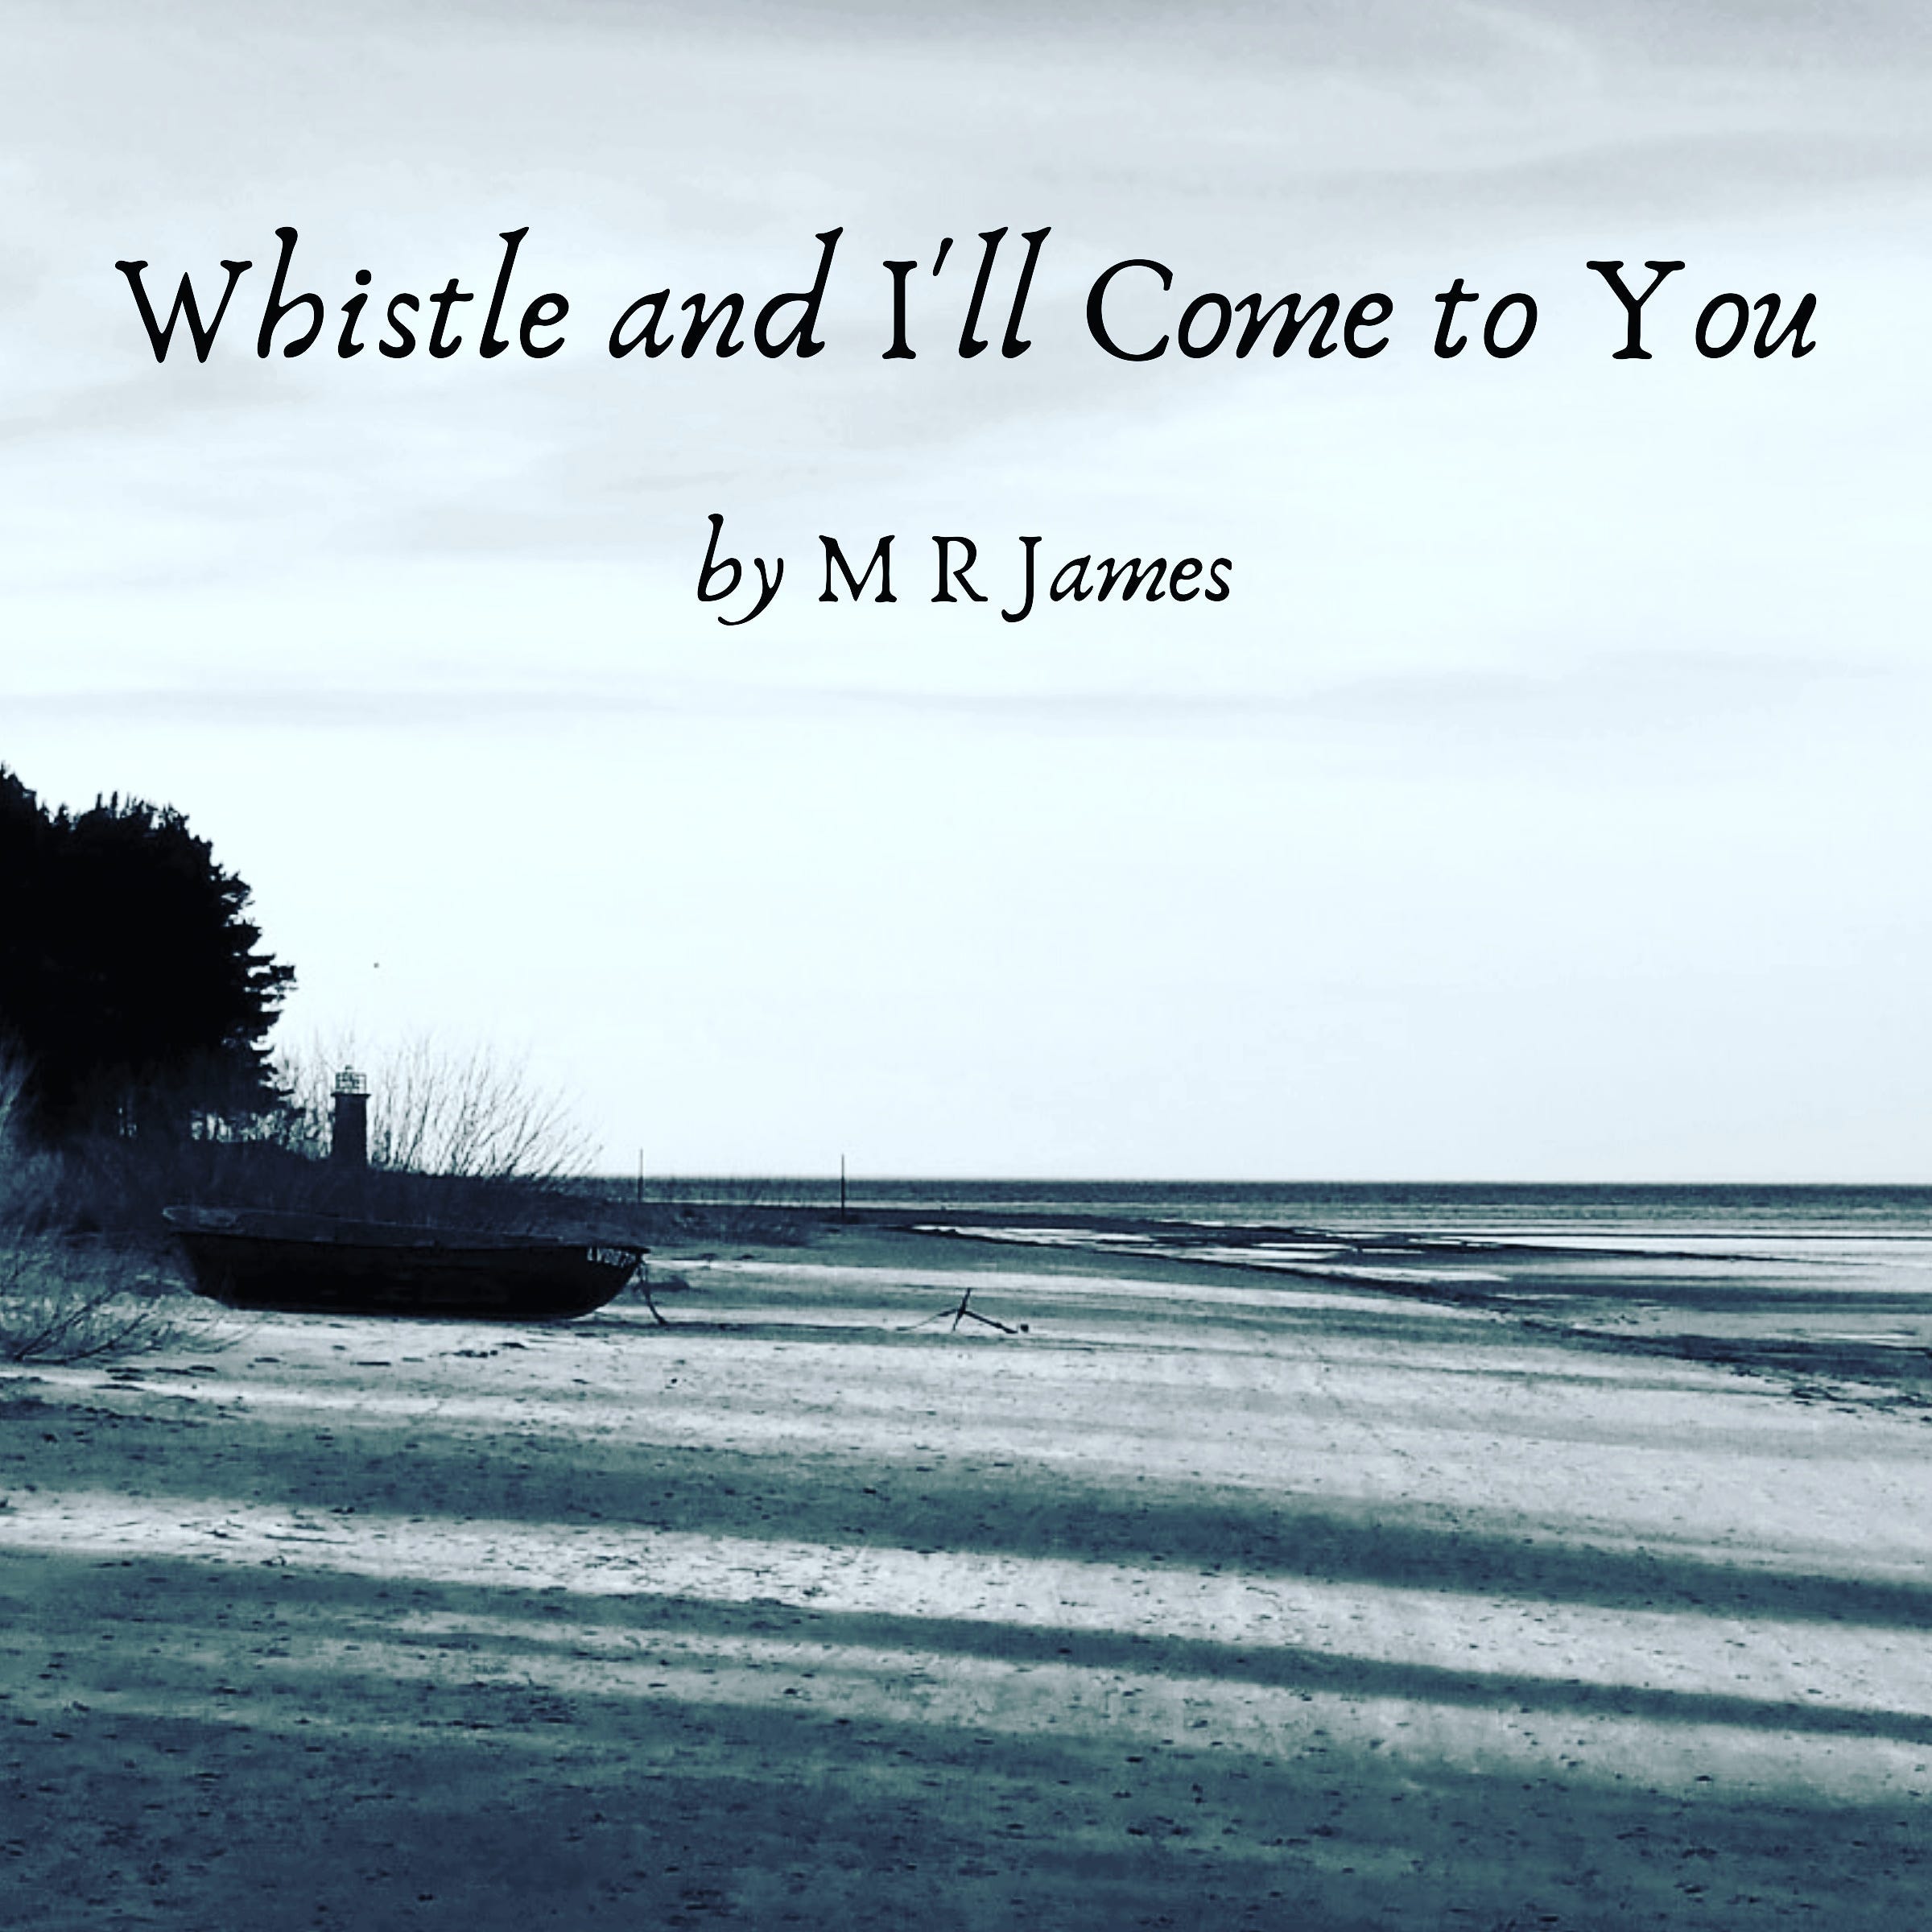 Oh Whistle And I'll Come To You by M R James